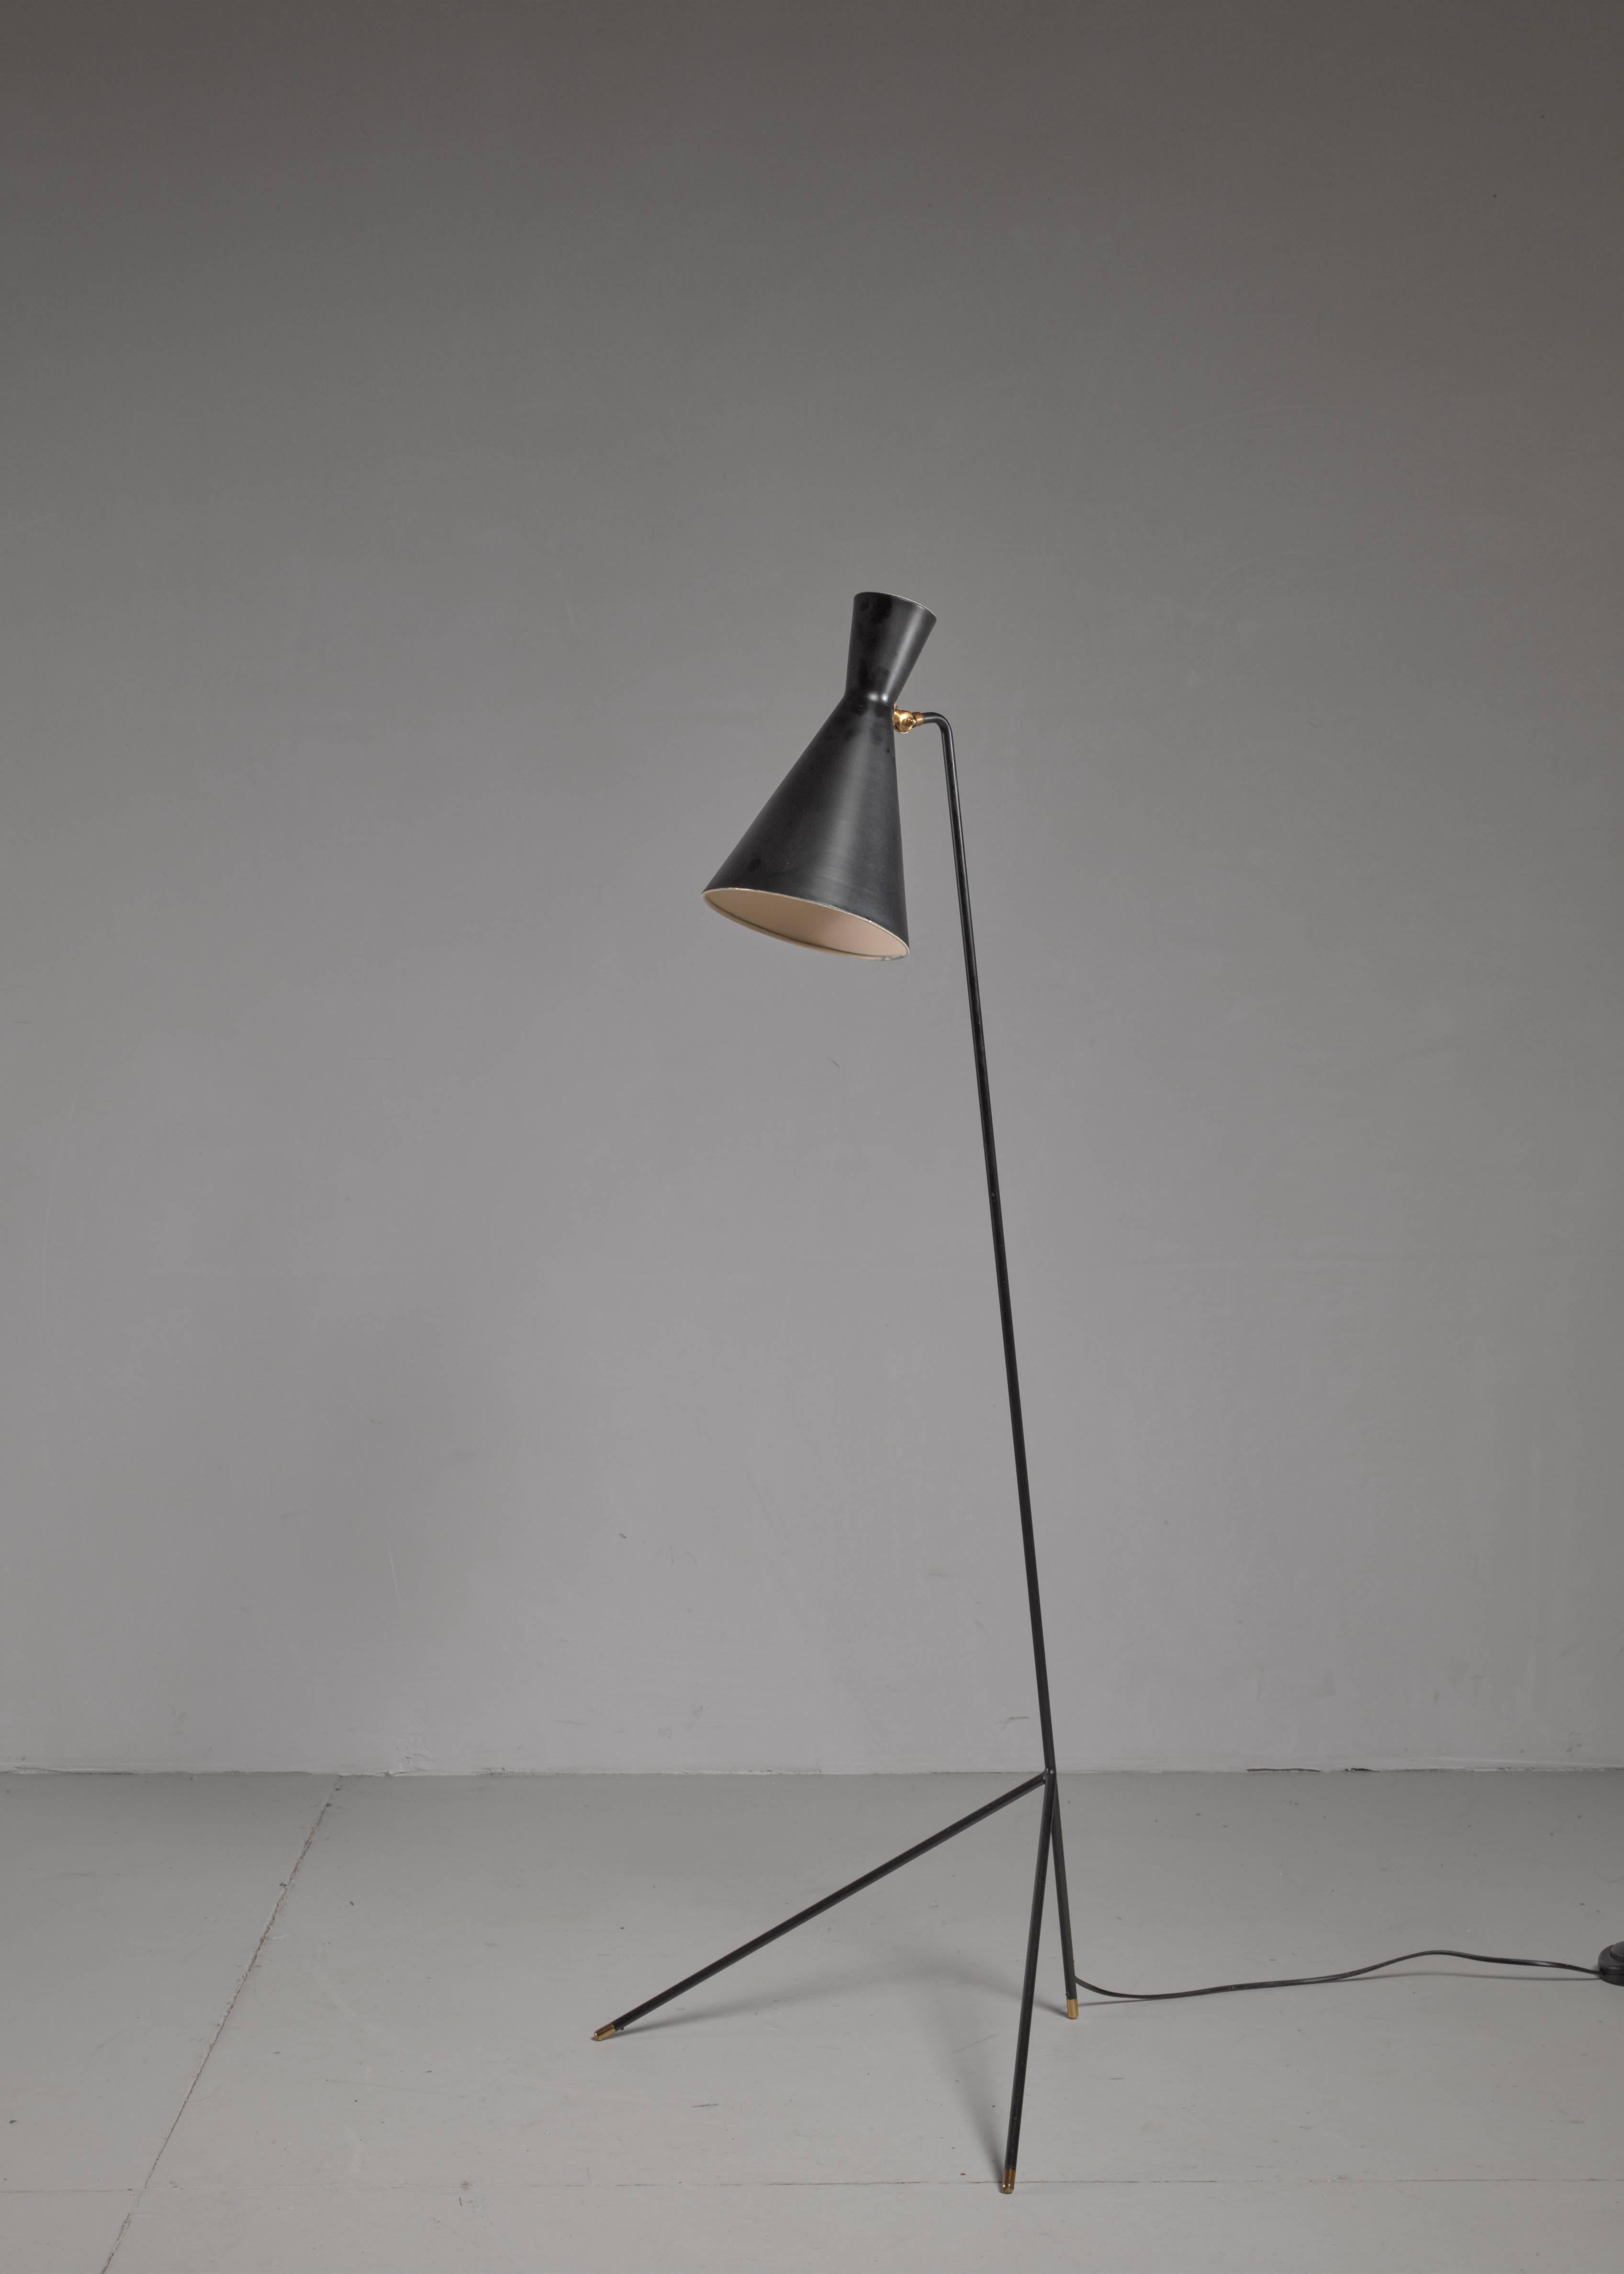 A Svend Aage Holm Sorensen floor lamp, made of black lacquered metal with brass details. The lamp has an adjustable diabolo shaped hood.